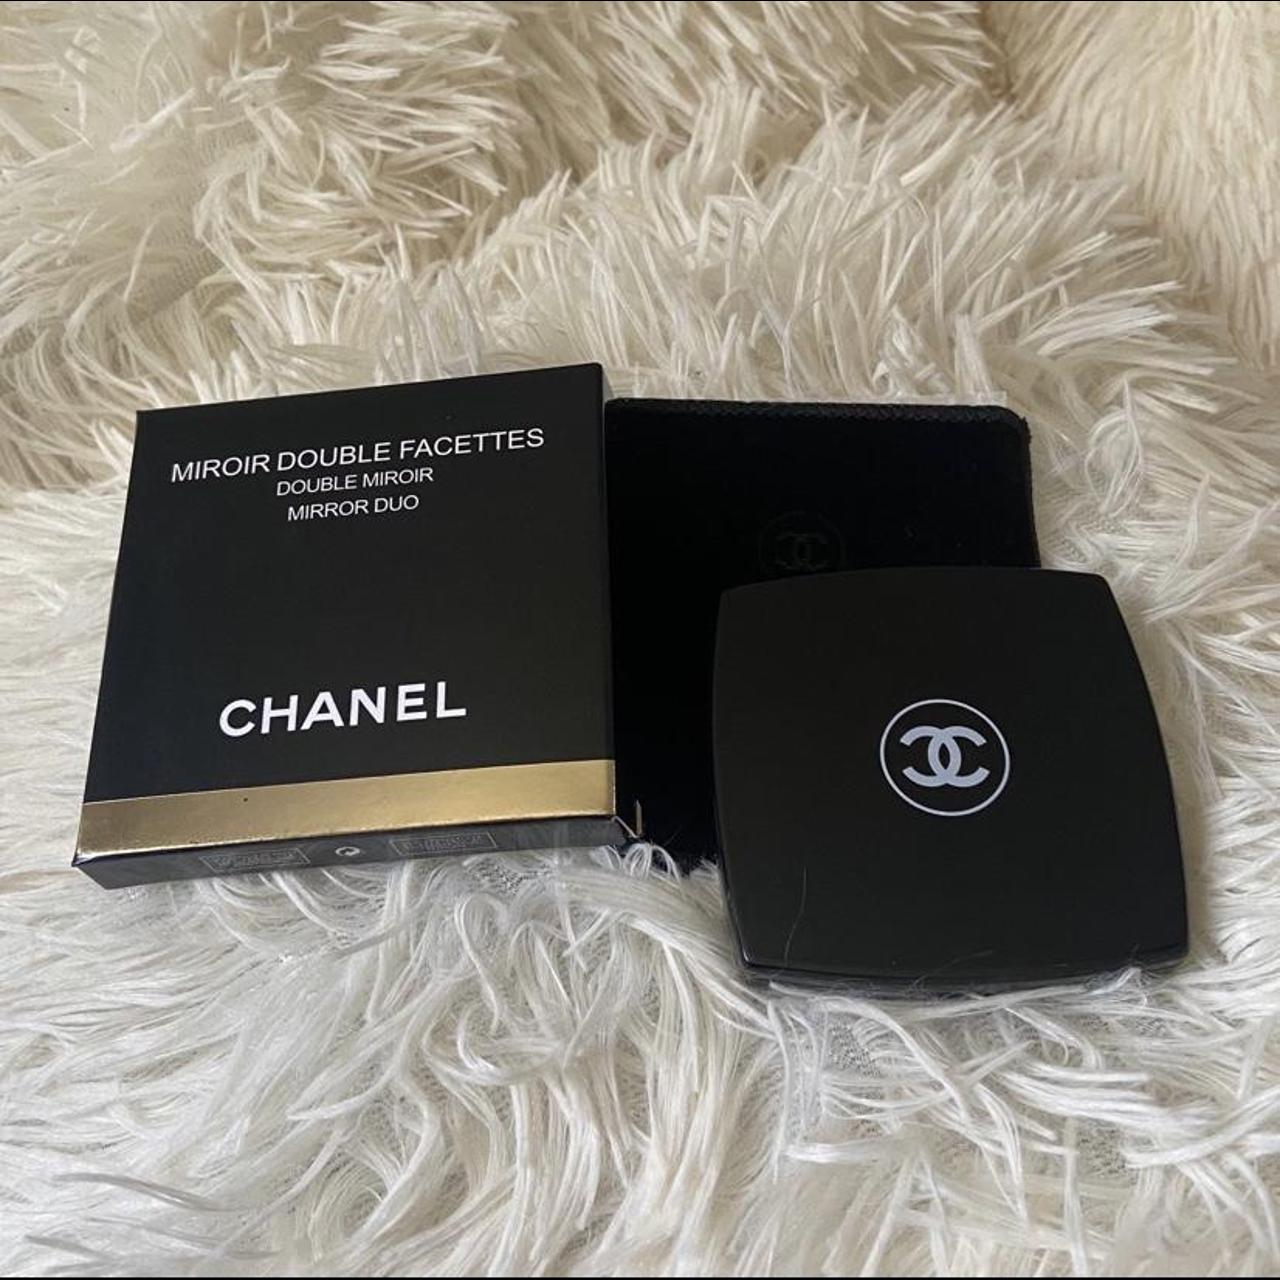 Chanel compact mirror. Straight out the box never - Depop